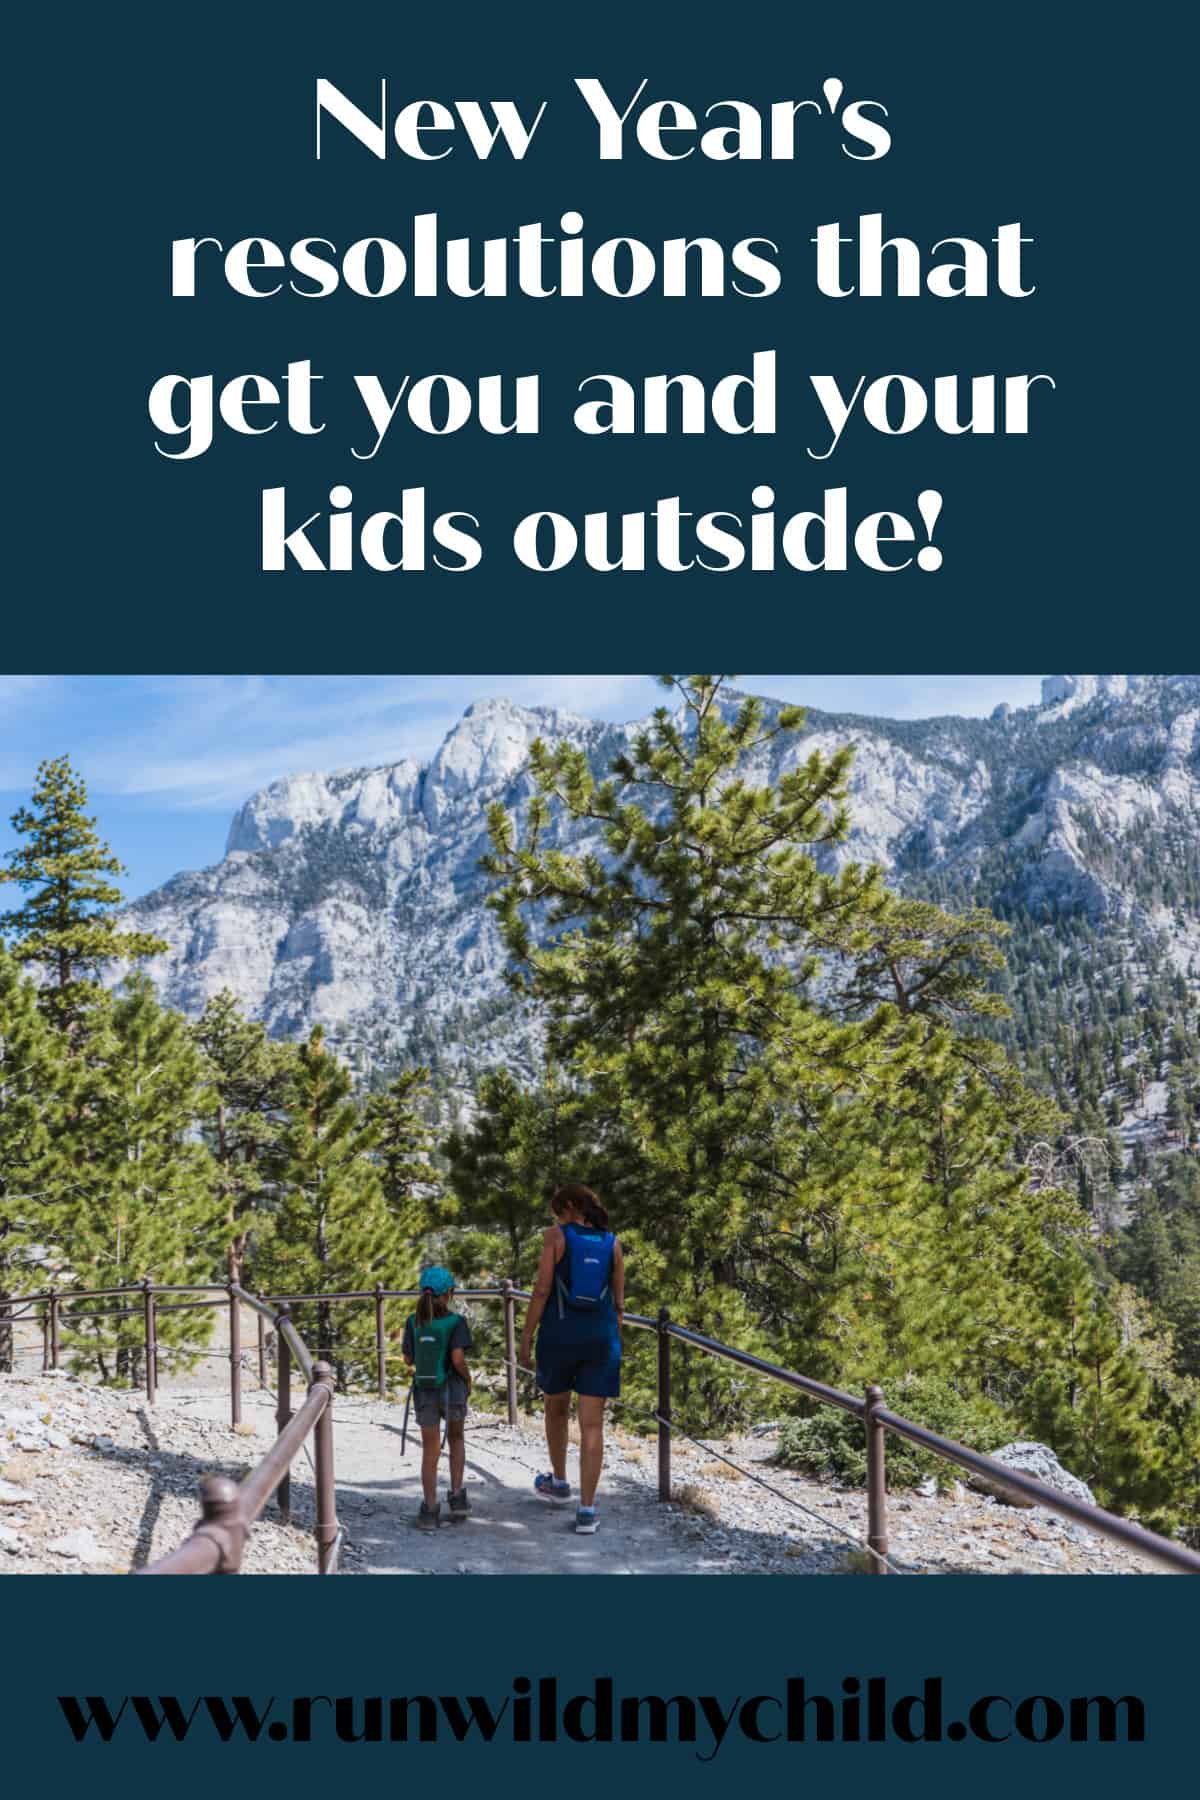 New Year's Resolutions to Get You Outside & Tips for Spending More Time Outside with Your Kids This Year